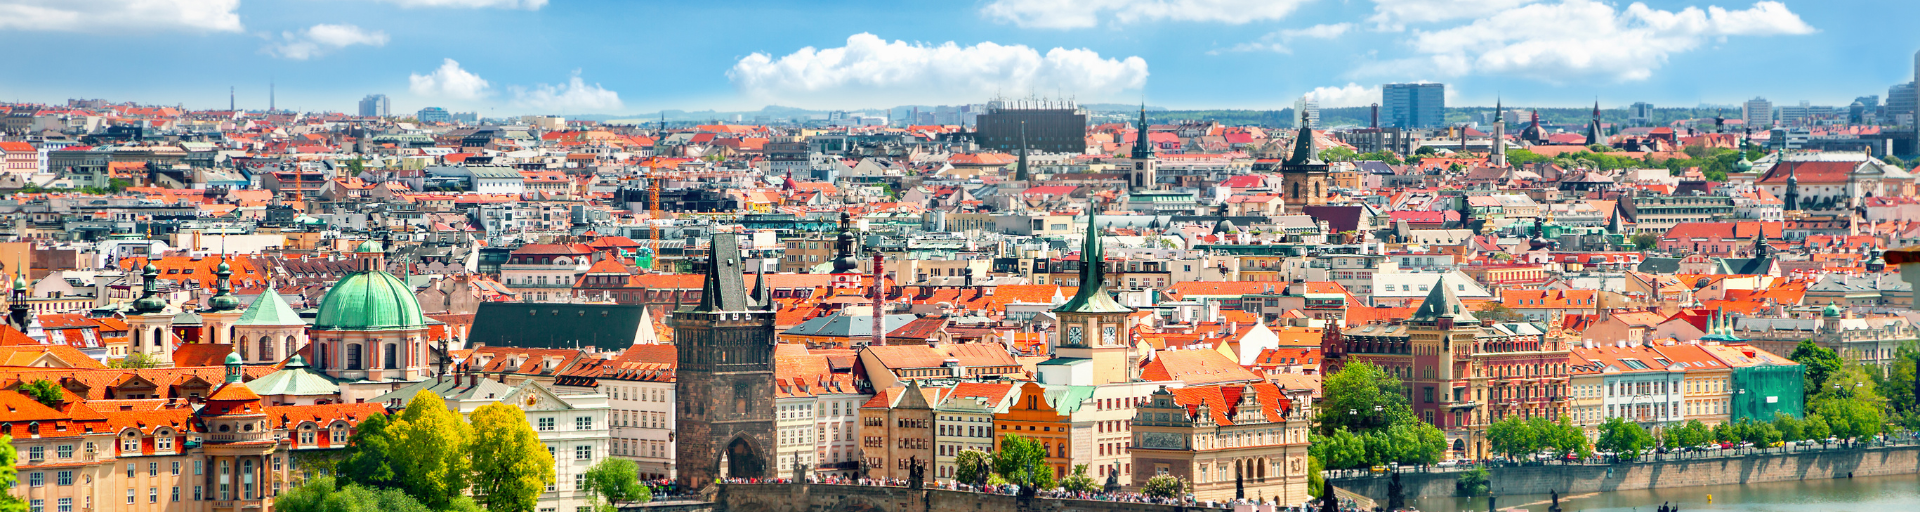 A view of Prague on the Global Network Program